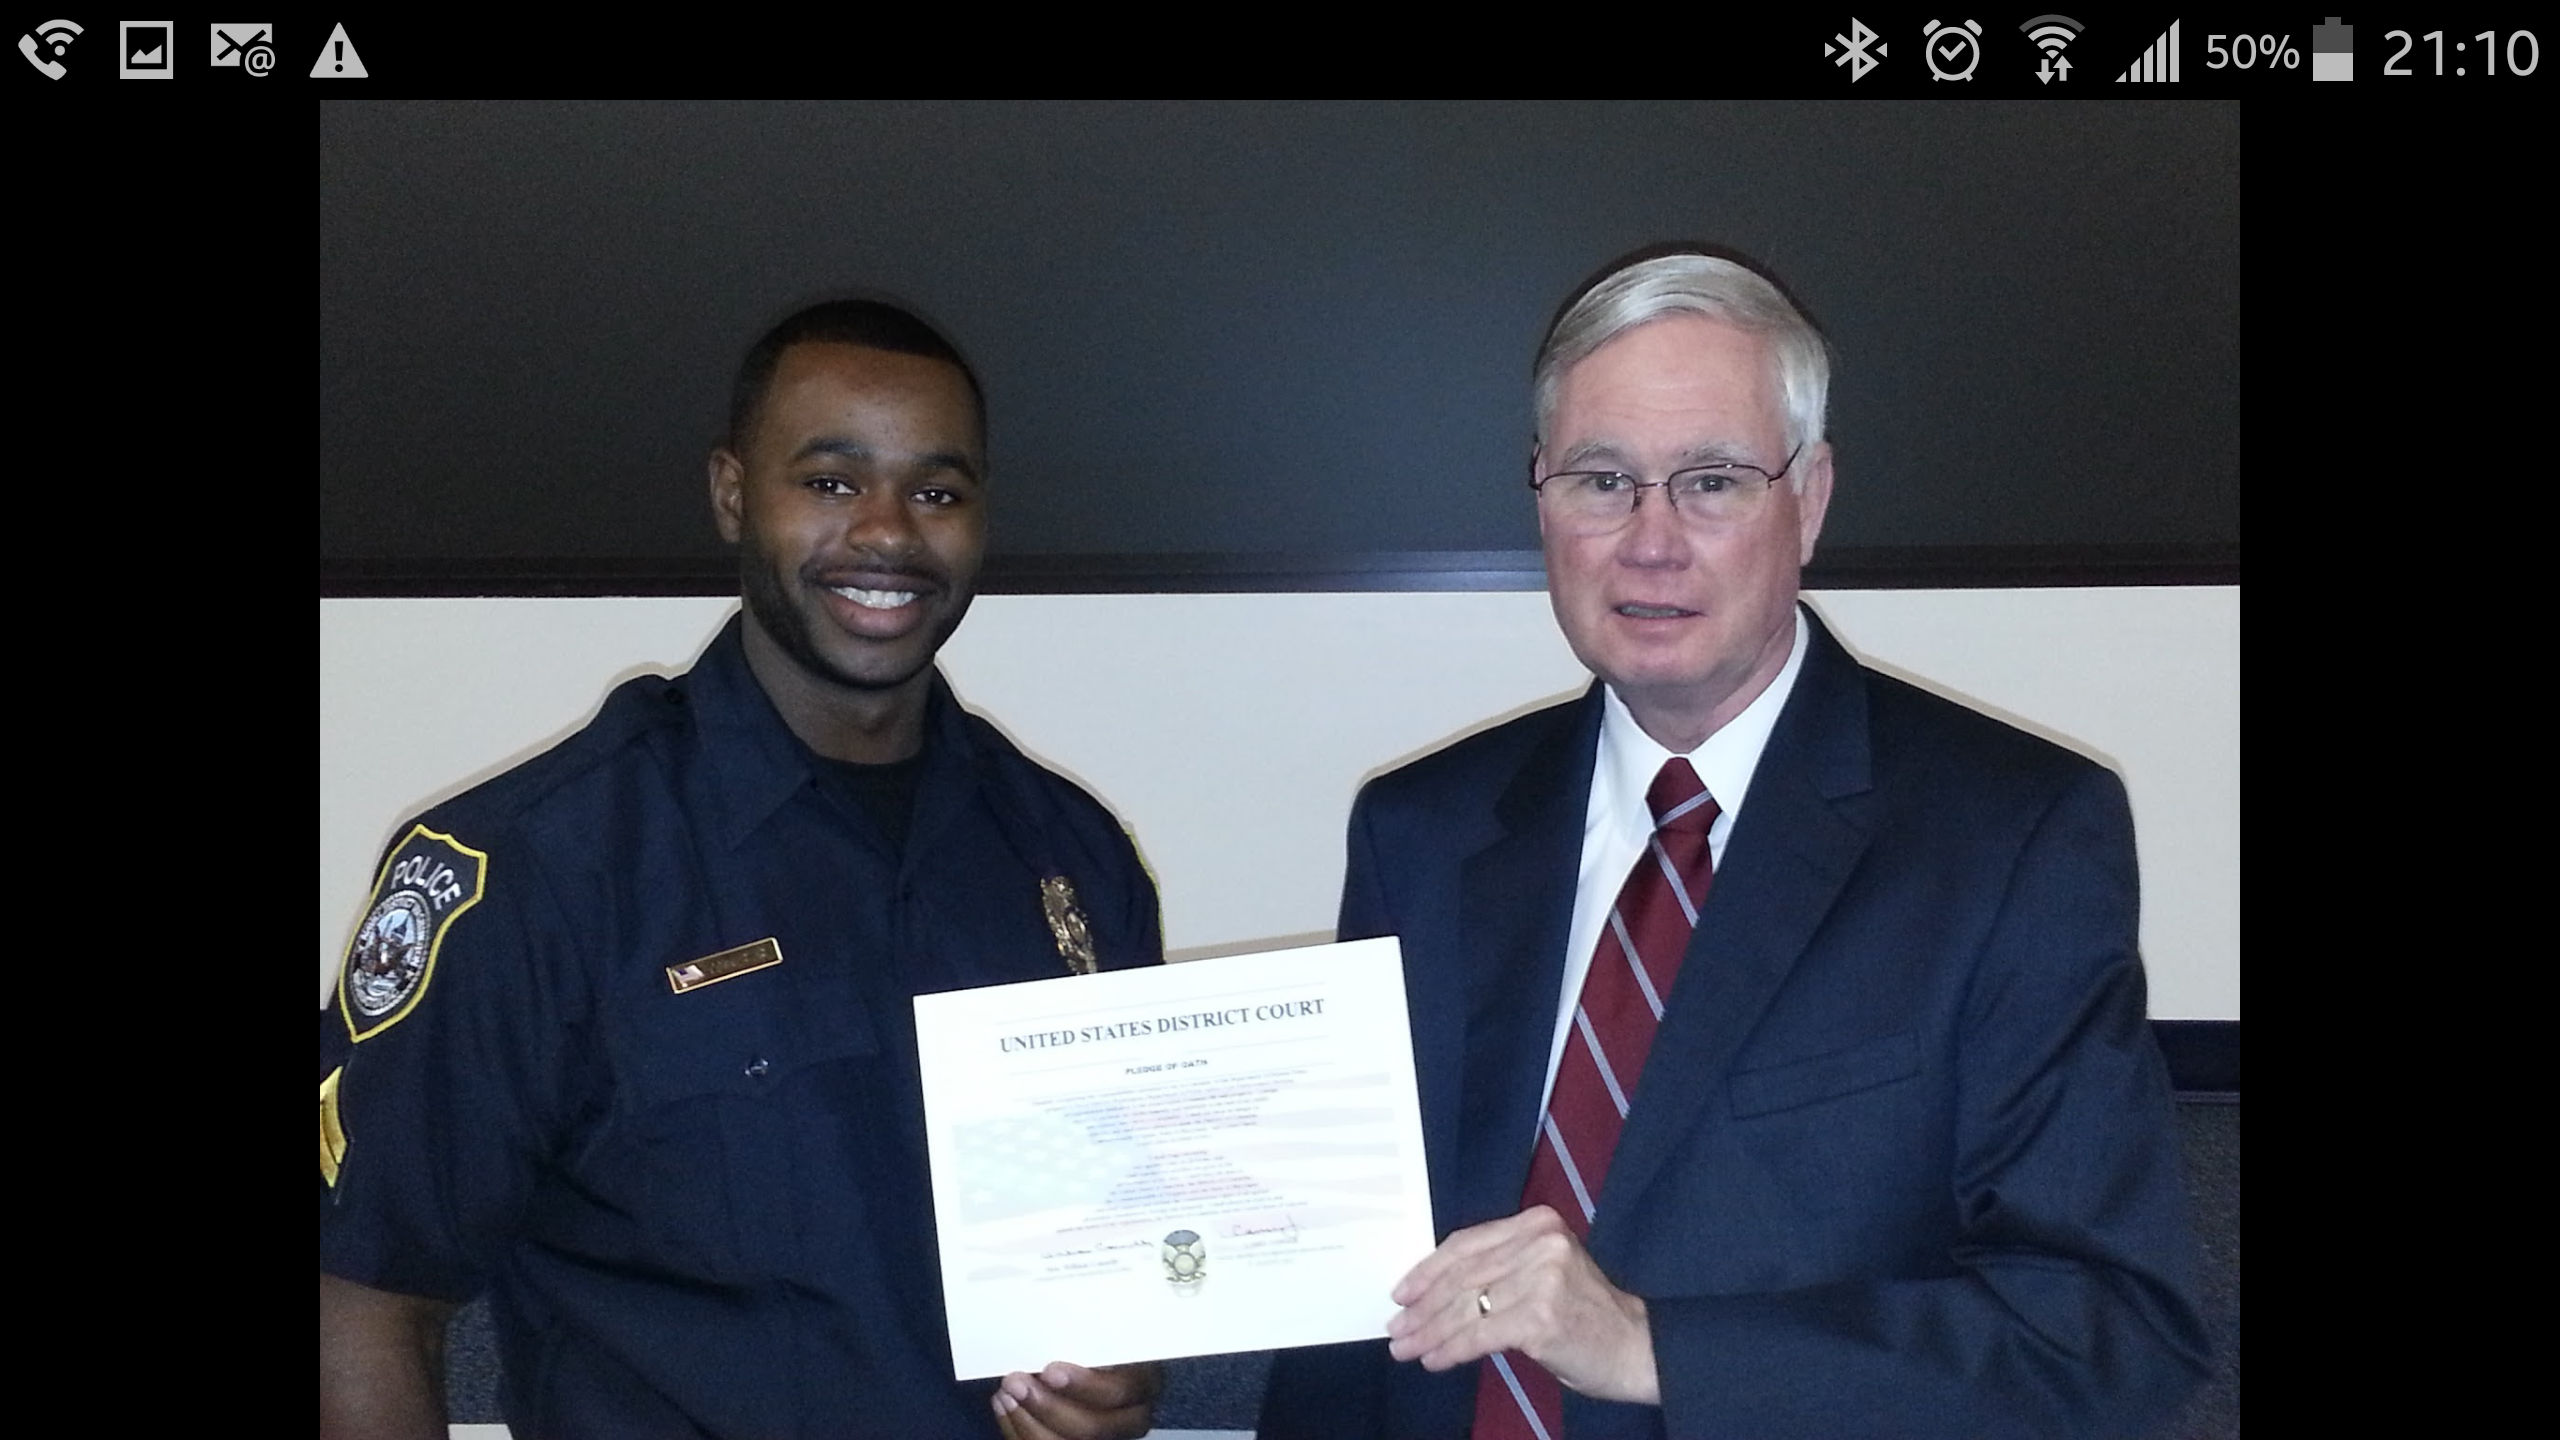 Cpt. Larry Conner with Judge Connelly